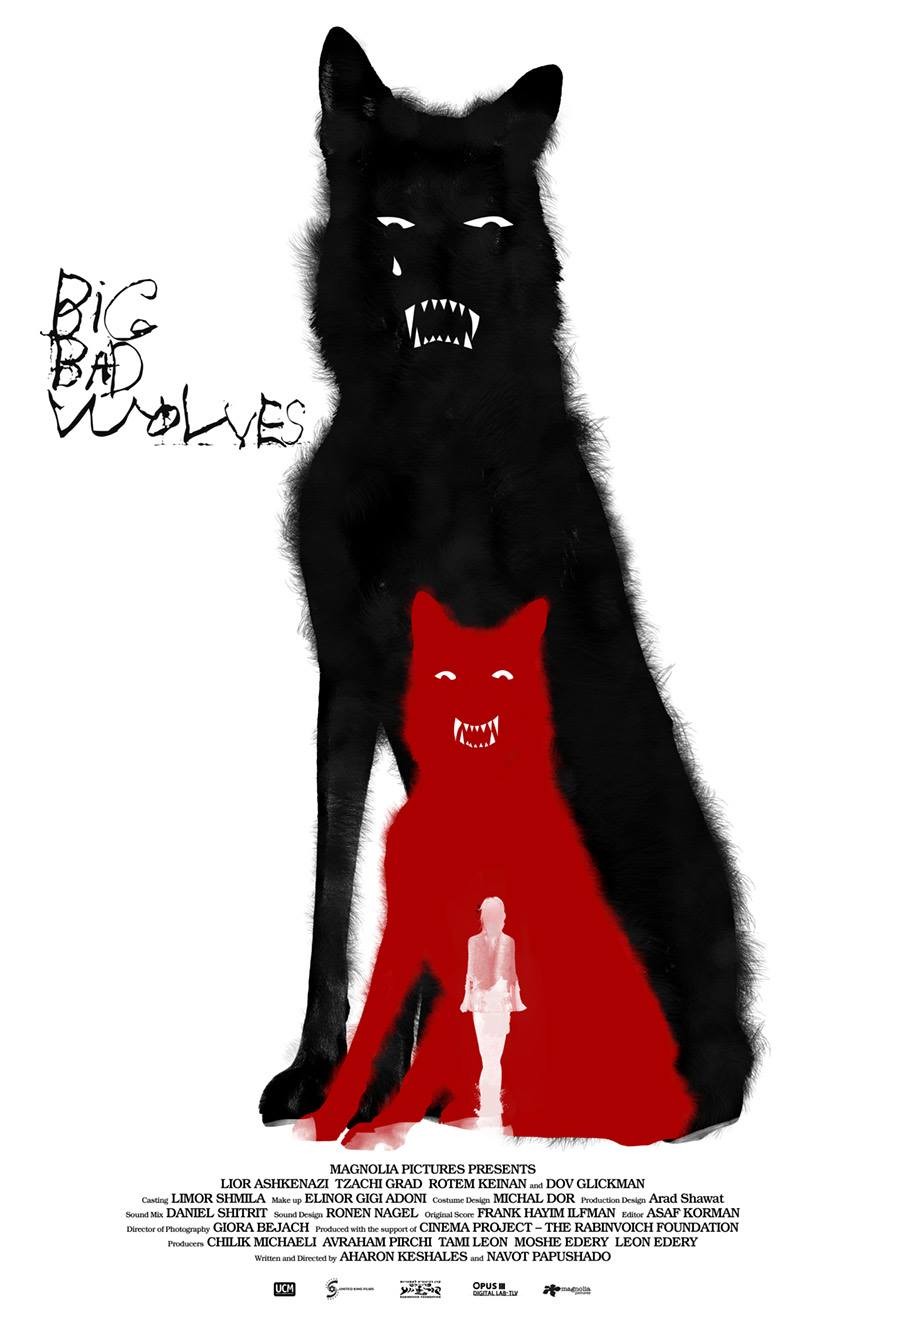 Extra Large Movie Poster Image for Big Bad Wolves (#11 of 11)